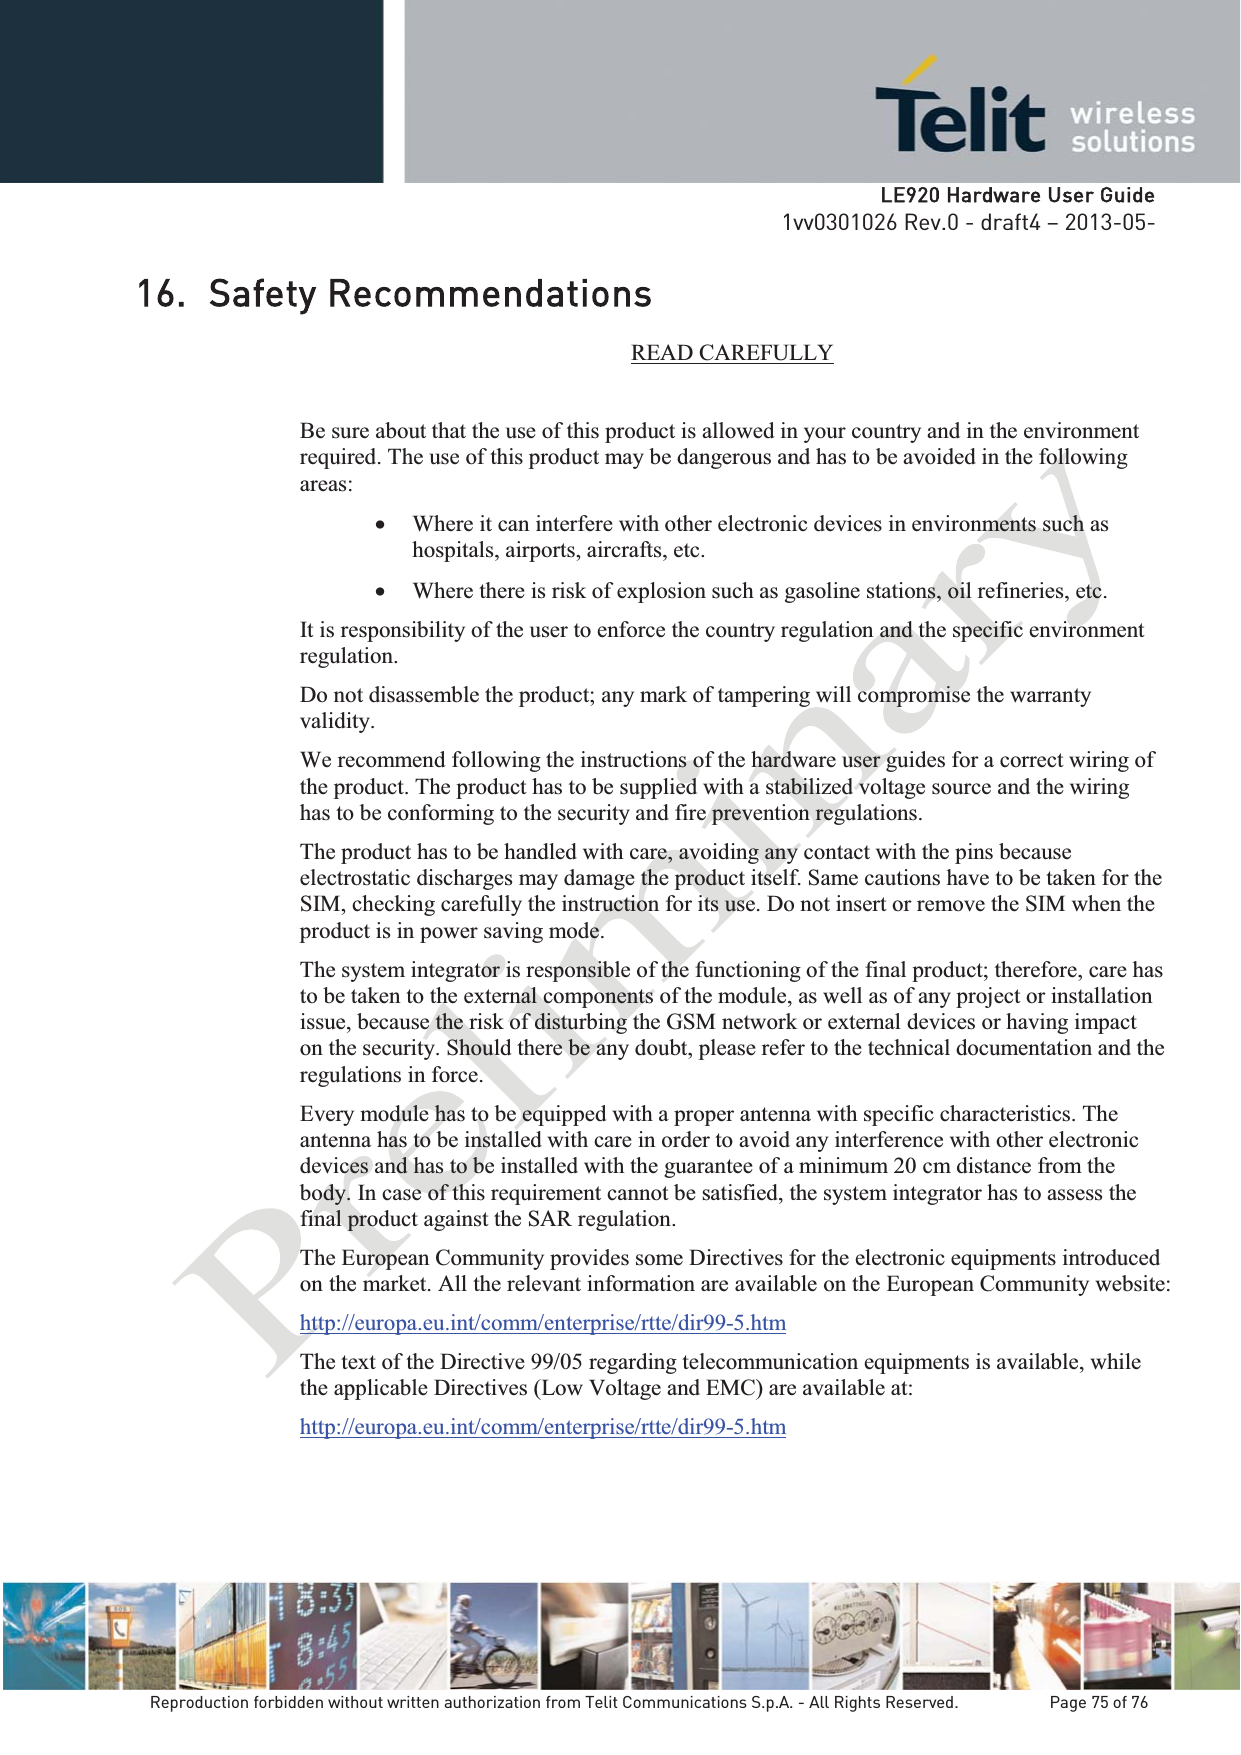   LLE920 Hardware User Guide1vv0301026 Rev.0 - draft4 – 2013-05-Reproduction forbidden without written authorization from Telit Communications S.p.A. - All Rights Reserved.    Page 75 of 76 16. Safety Recommendations READ CAREFULLY Be sure about that the use of this product is allowed in your country and in the environment required. The use of this product may be dangerous and has to be avoided in the following areas: x Where it can interfere with other electronic devices in environments such as hospitals, airports, aircrafts, etc. x Where there is risk of explosion such as gasoline stations, oil refineries, etc.  It is responsibility of the user to enforce the country regulation and the specific environment regulation. Do not disassemble the product; any mark of tampering will compromise the warranty validity. We recommend following the instructions of the hardware user guides for a correct wiring of the product. The product has to be supplied with a stabilized voltage source and the wiring has to be conforming to the security and fire prevention regulations. The product has to be handled with care, avoiding any contact with the pins because electrostatic discharges may damage the product itself. Same cautions have to be taken for the SIM, checking carefully the instruction for its use. Do not insert or remove the SIM when the product is in power saving mode. The system integrator is responsible of the functioning of the final product; therefore, care has to be taken to the external components of the module, as well as of any project or installation issue, because the risk of disturbing the GSM network or external devices or having impact on the security. Should there be any doubt, please refer to the technical documentation and the regulations in force. Every module has to be equipped with a proper antenna with specific characteristics. The antenna has to be installed with care in order to avoid any interference with other electronic devices and has to be installed with the guarantee of a minimum 20 cm distance from the body. In case of this requirement cannot be satisfied, the system integrator has to assess the final product against the SAR regulation. The European Community provides some Directives for the electronic equipments introduced on the market. All the relevant information are available on the European Community website: http://europa.eu.int/comm/enterprise/rtte/dir99-5.htm The text of the Directive 99/05 regarding telecommunication equipments is available, while the applicable Directives (Low Voltage and EMC) are available at: http://europa.eu.int/comm/enterprise/rtte/dir99-5.htm  